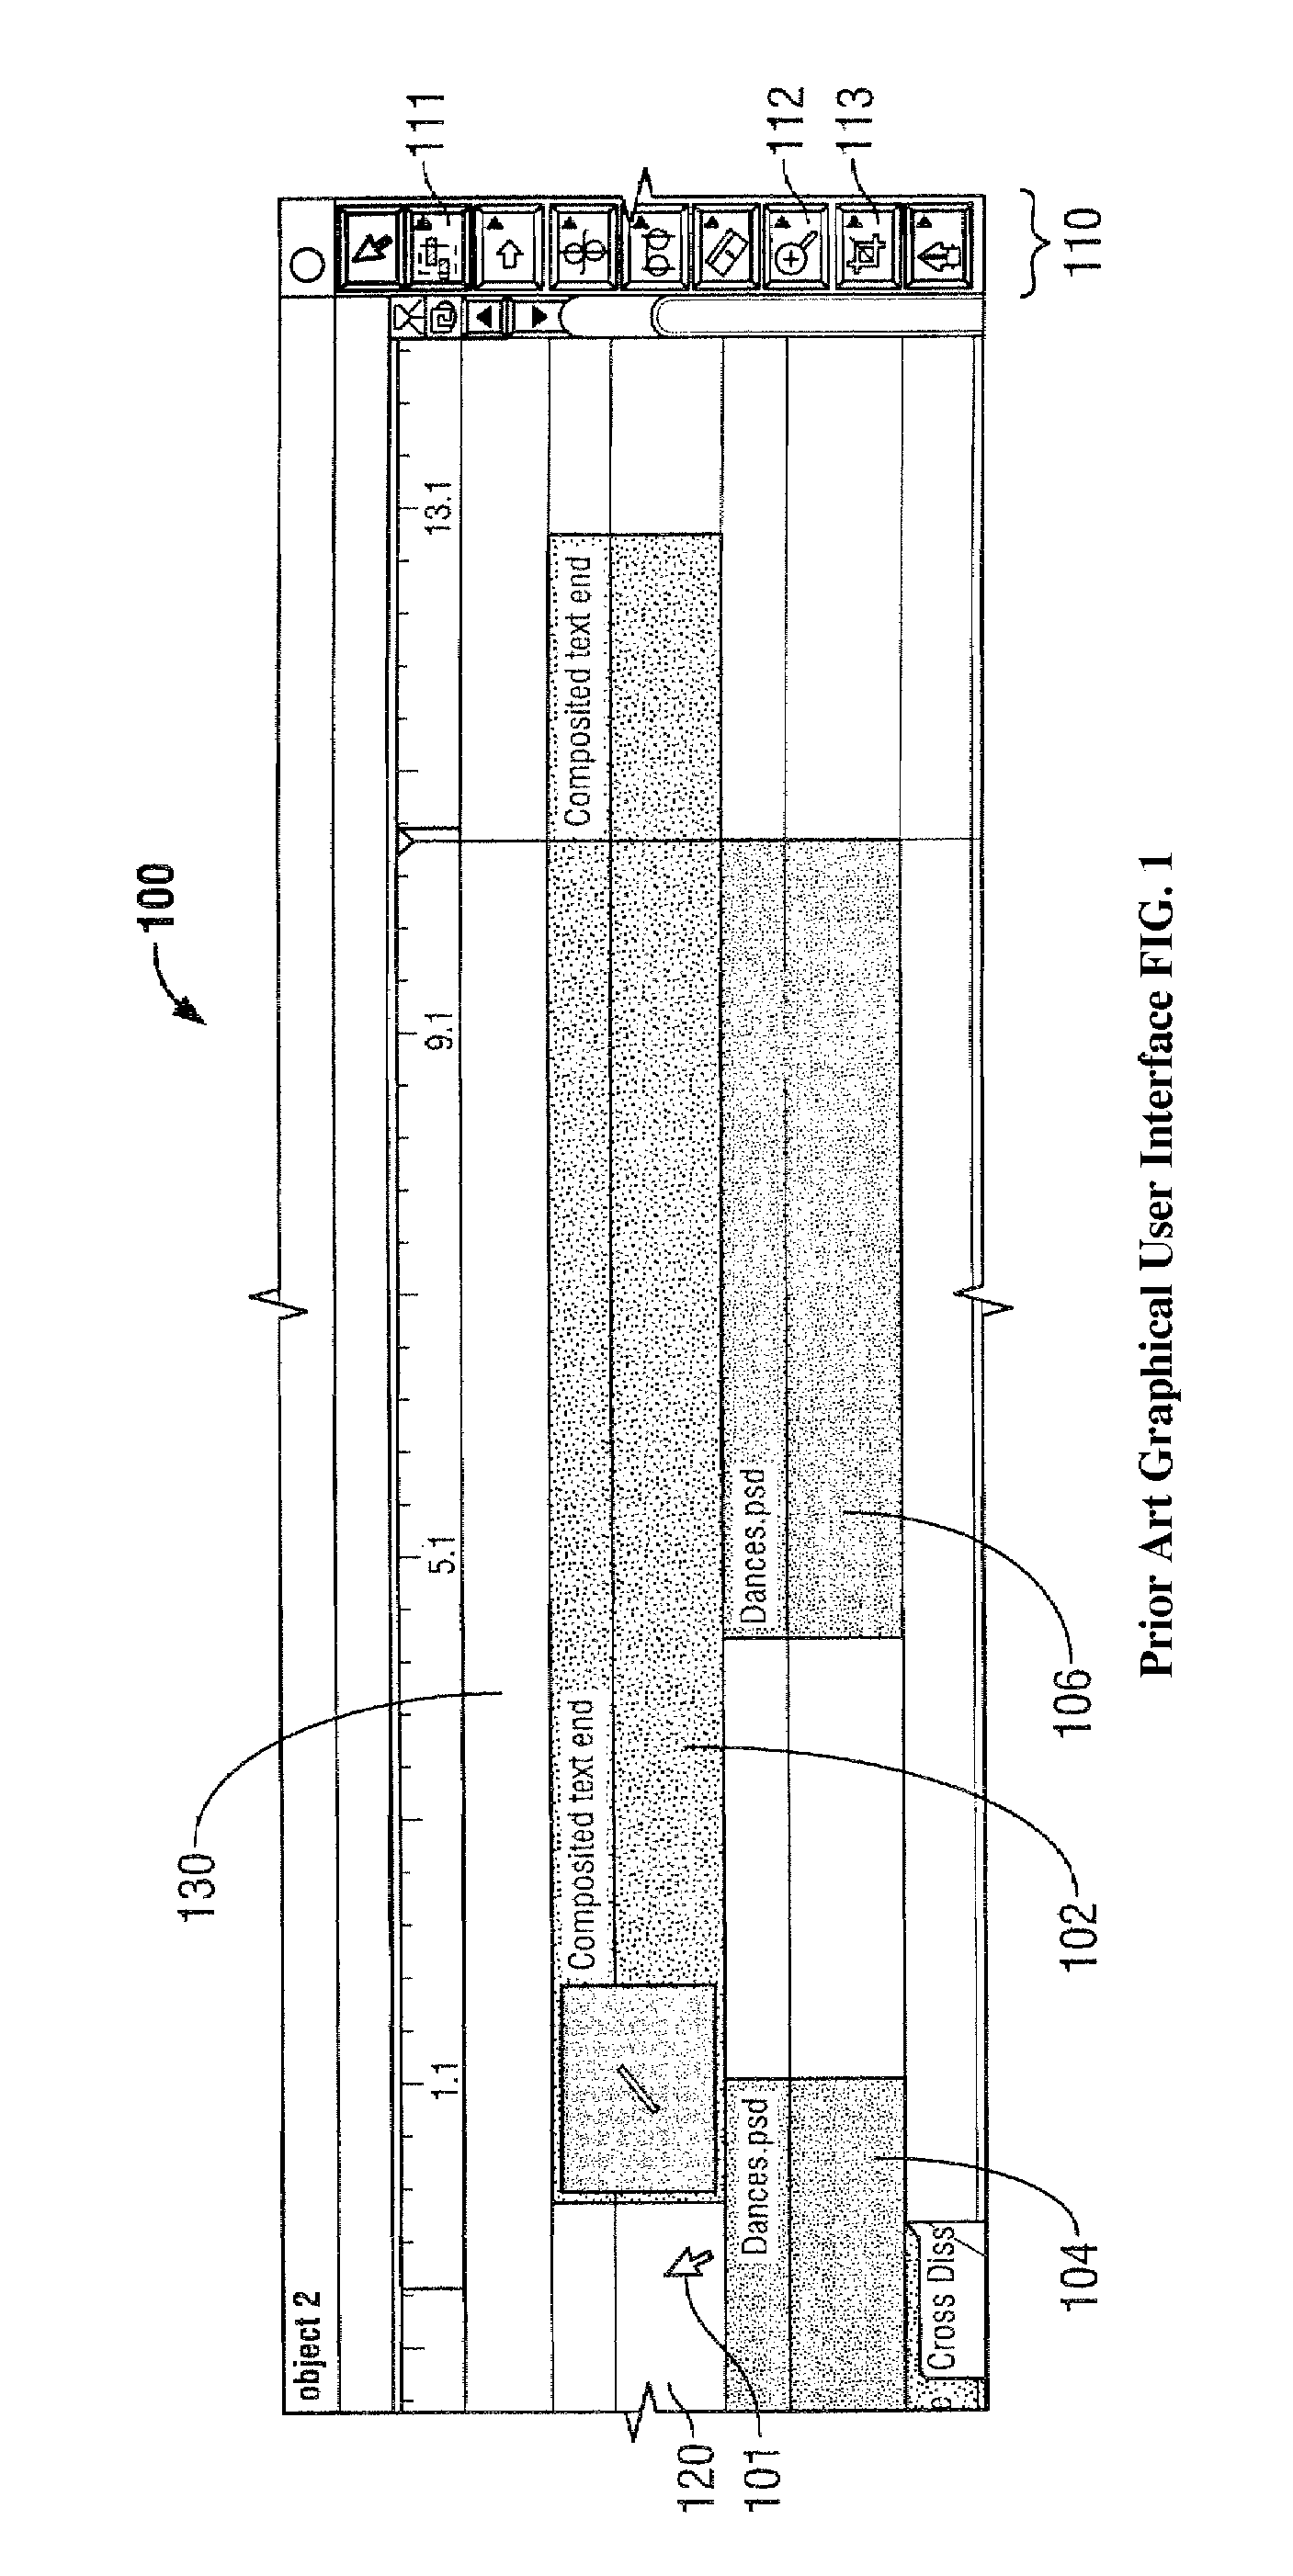 Interface for providing modeless timeline based selection of an audio or video file